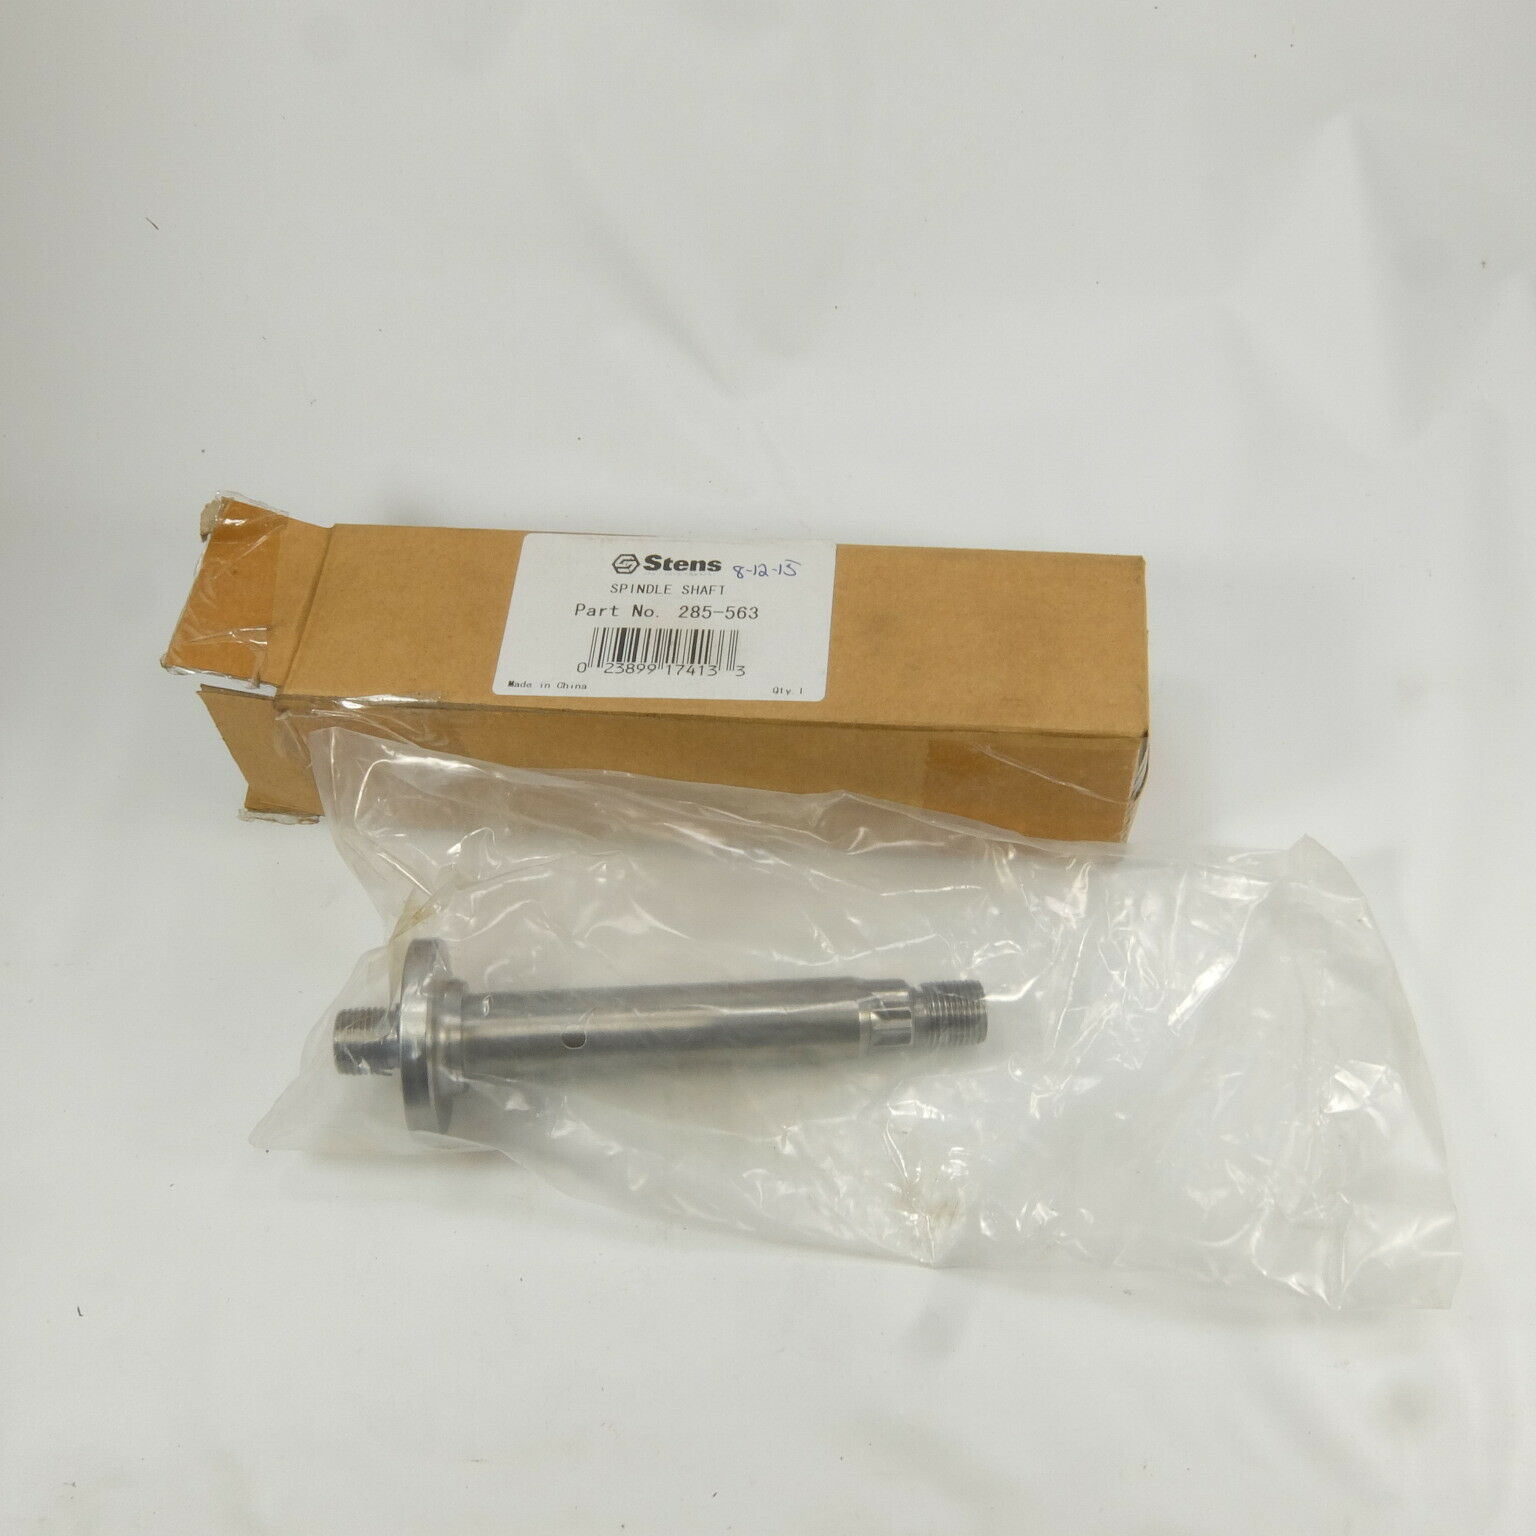 Stens 285-563 Blade Spindle Shaft replaces MTD 738-0933 - $8.00